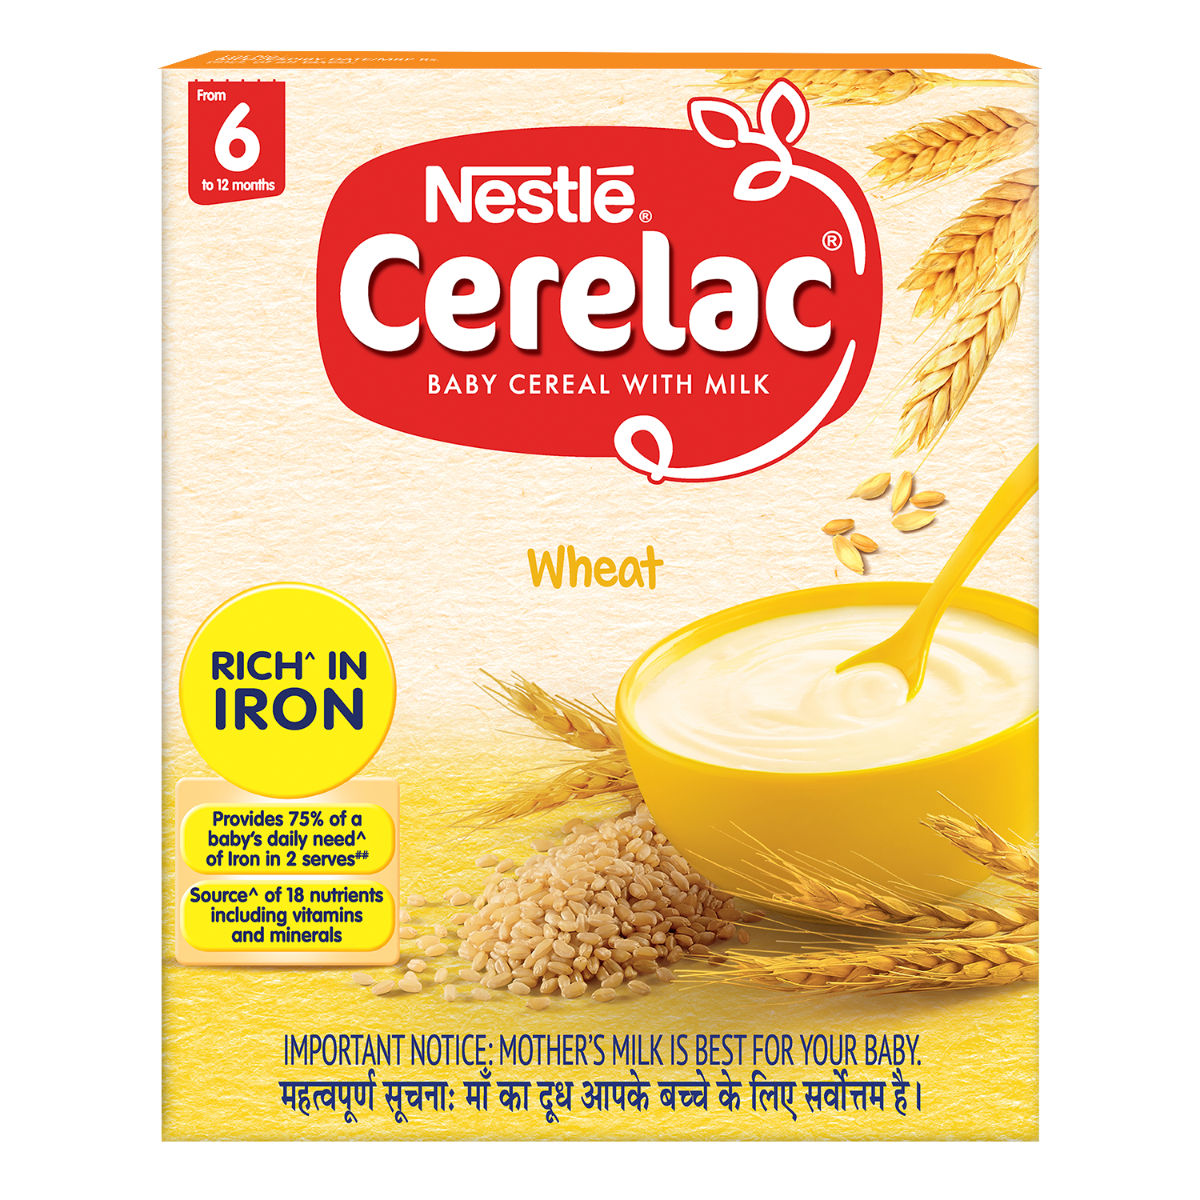 Buy Nestle Cerelac Wheat Baby Cereal, 6 to 12 Months, 300 gm Refill Pack Online